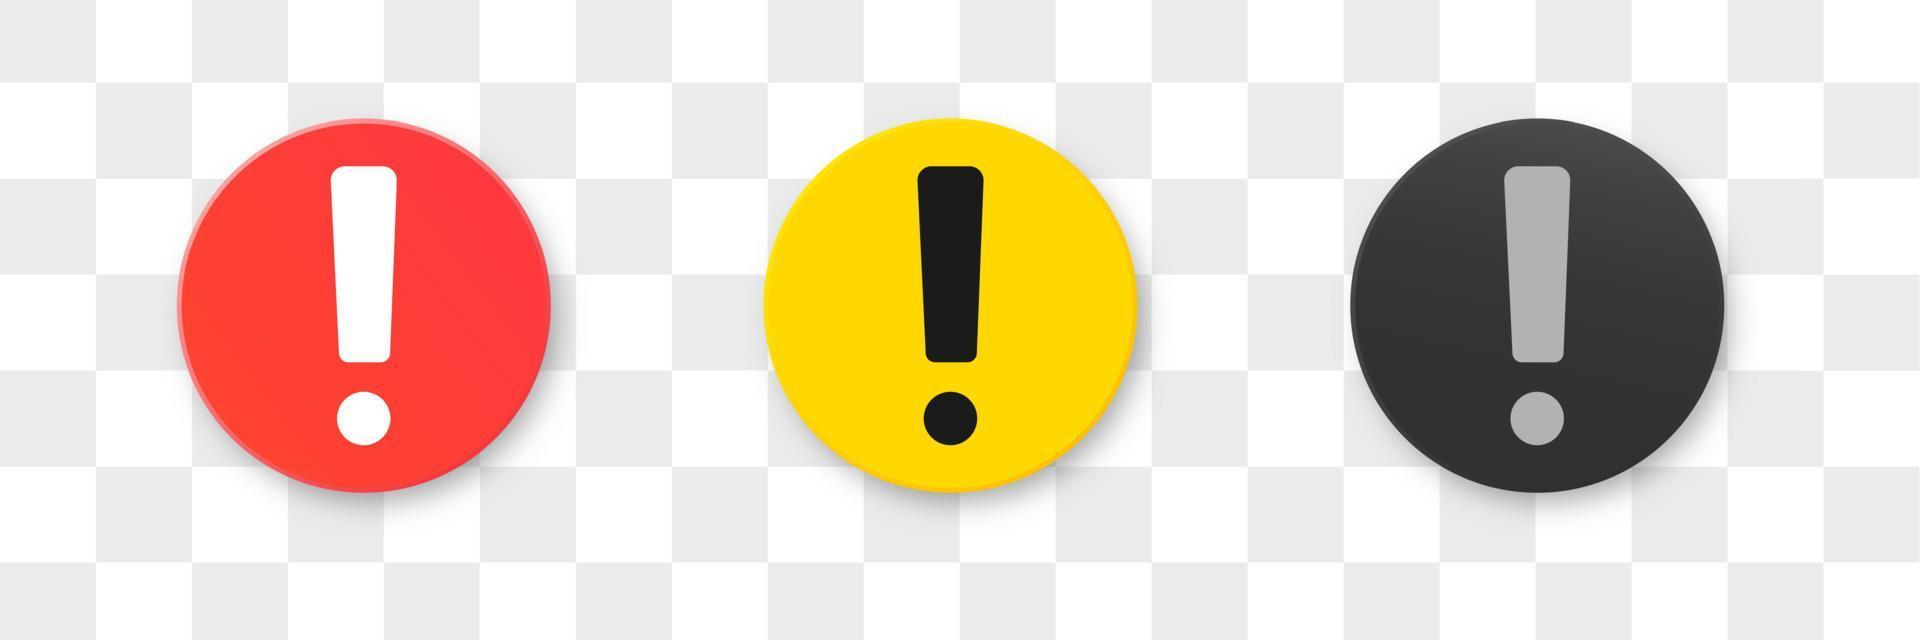 Circle warning symbols with exclamation mark on white background. Attention vector icon.